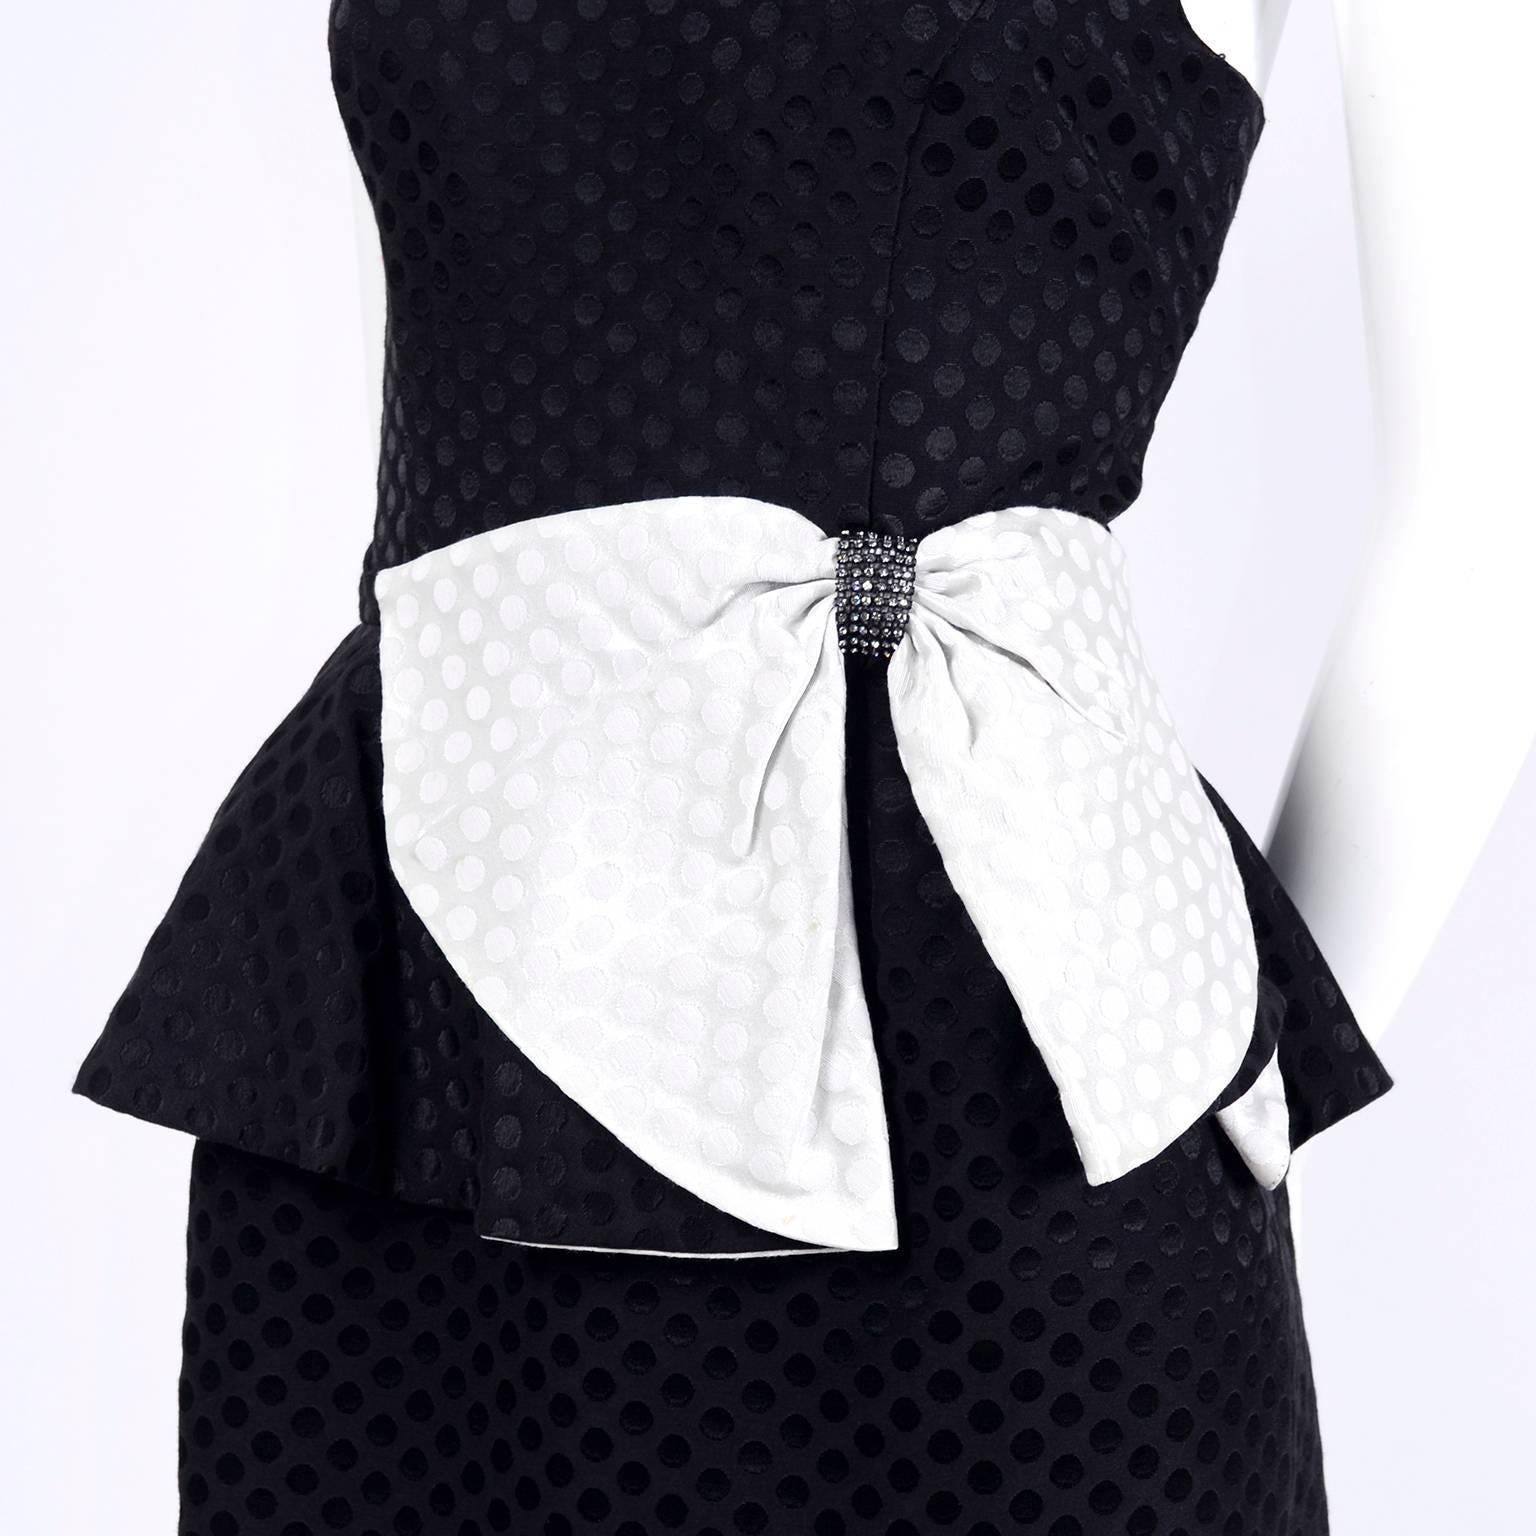 This black and white polka dot vintage dress was made in the 1980’s. The dress is black with tone on tone polka dots with a white tone in tone polka dot bow with rhinestones. The bodice of the dress is lined and there is an 8” slit in the back. We